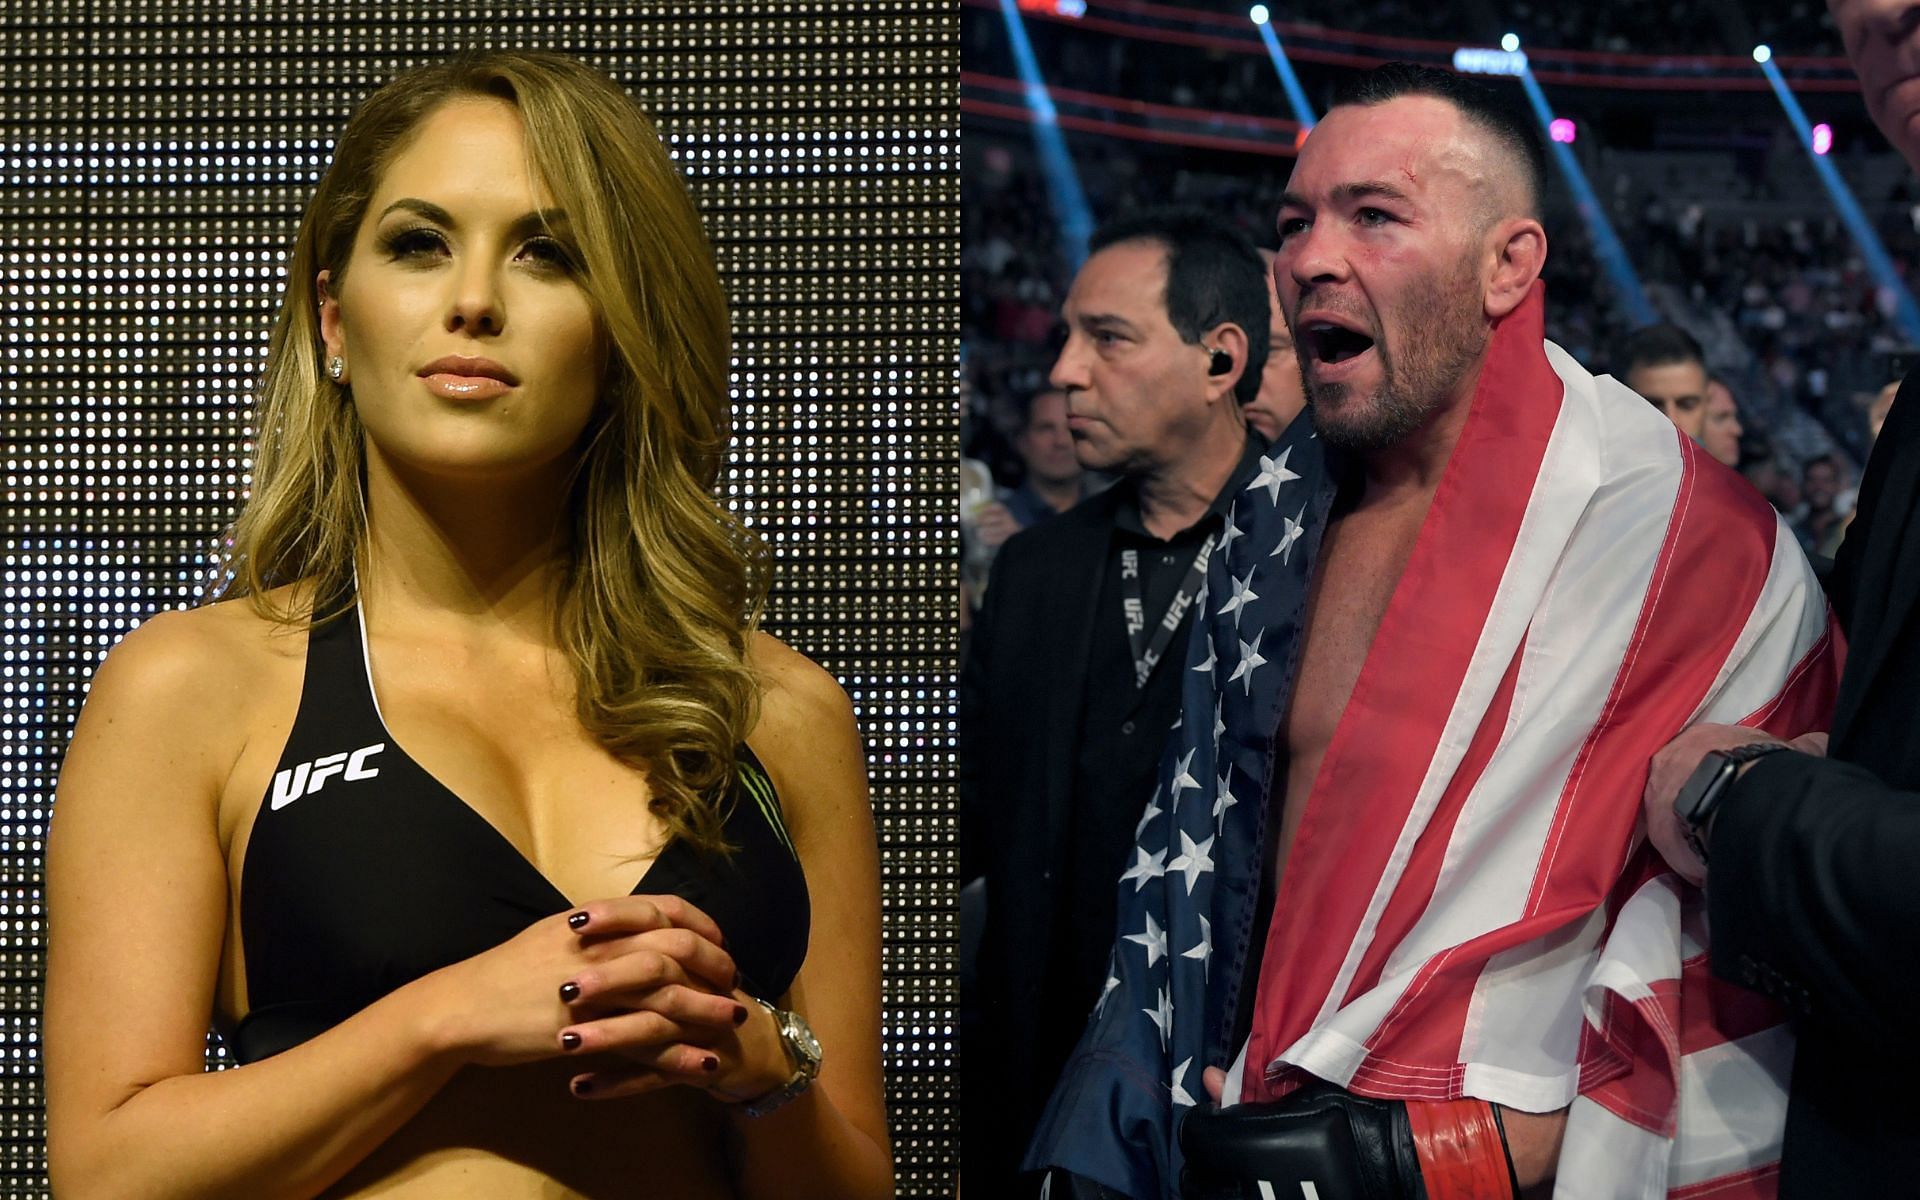 Brittney Palmer (left), Colby Covington (right) [Image Credits: Getty Images]